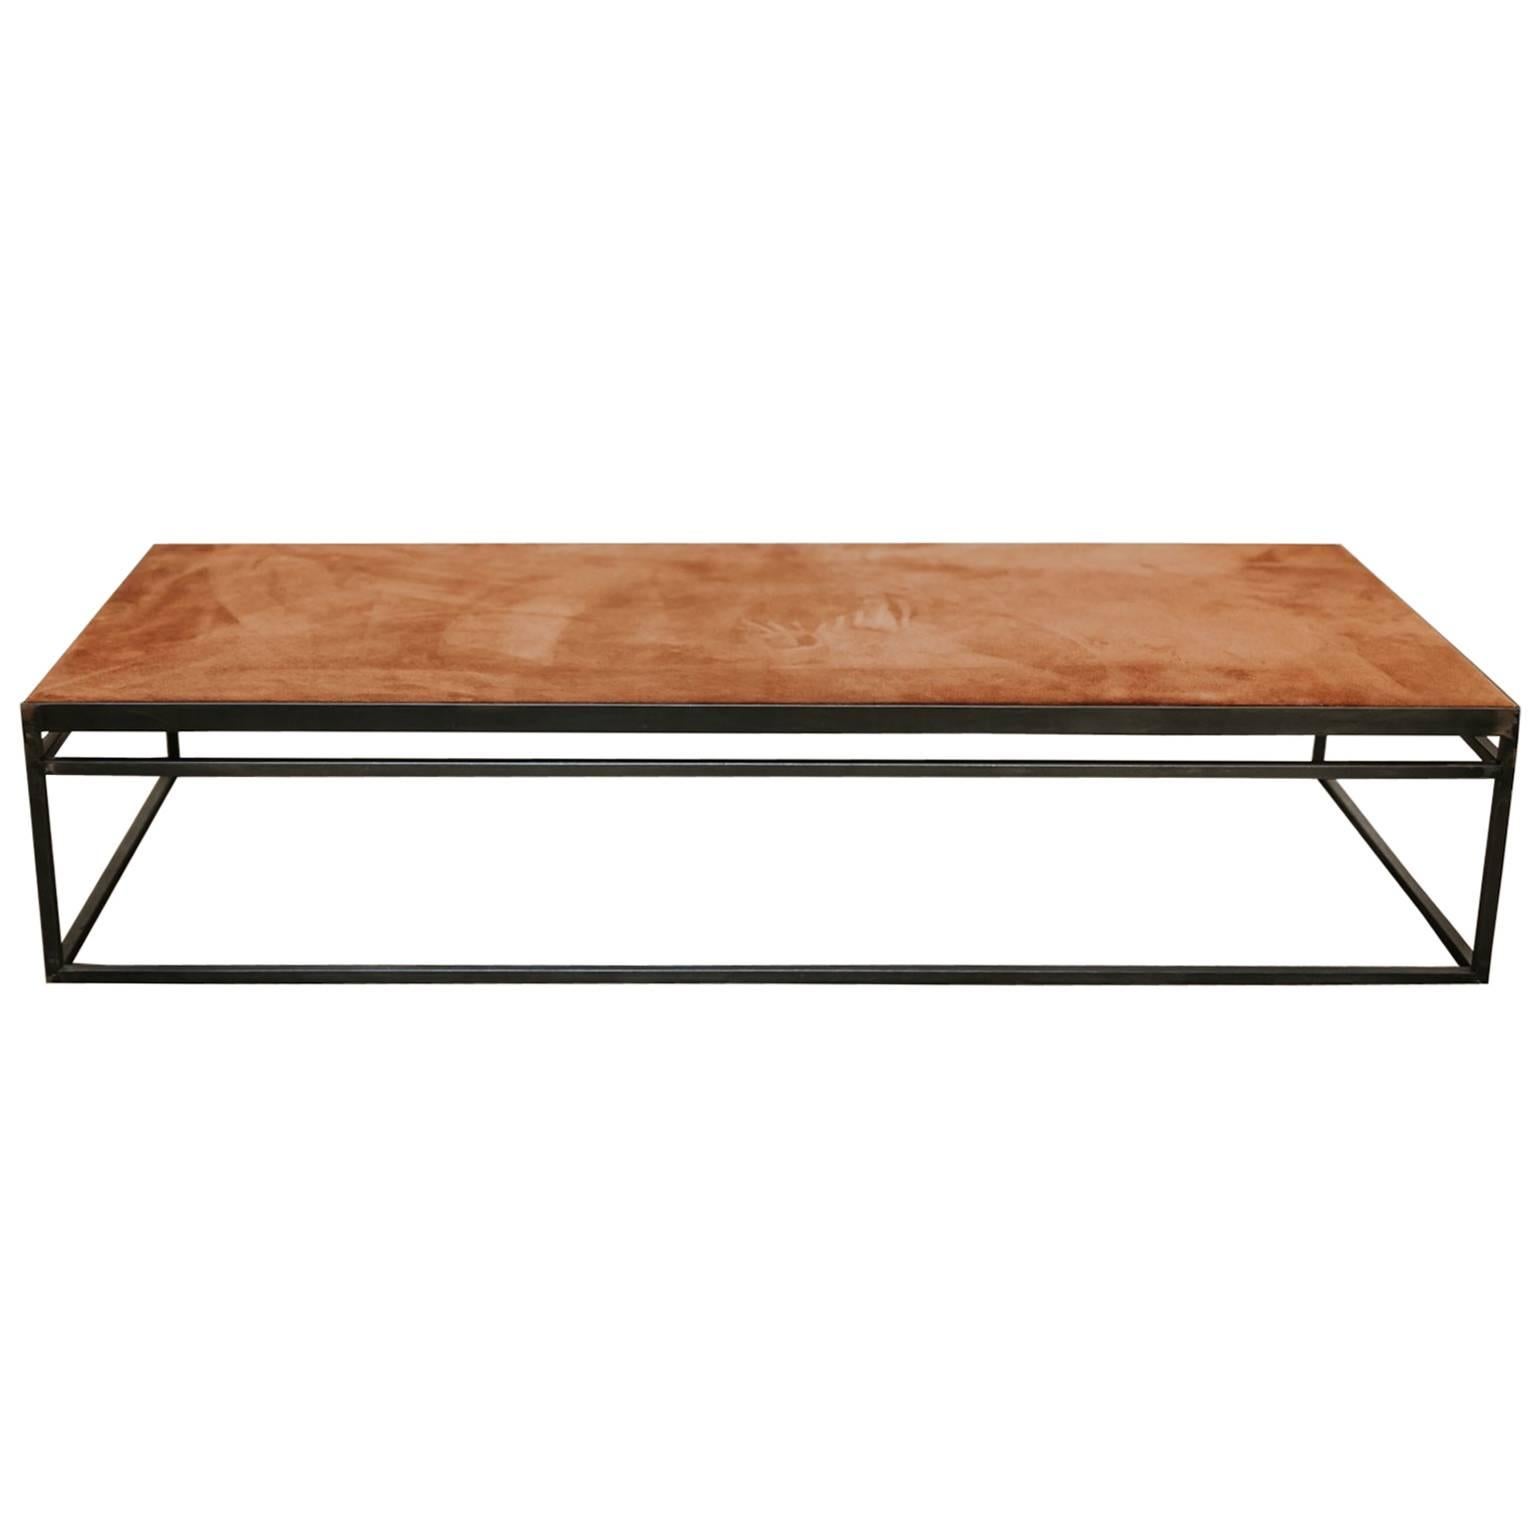 Customized Coffee Table, Old Suède/Leather Top on Iron Base